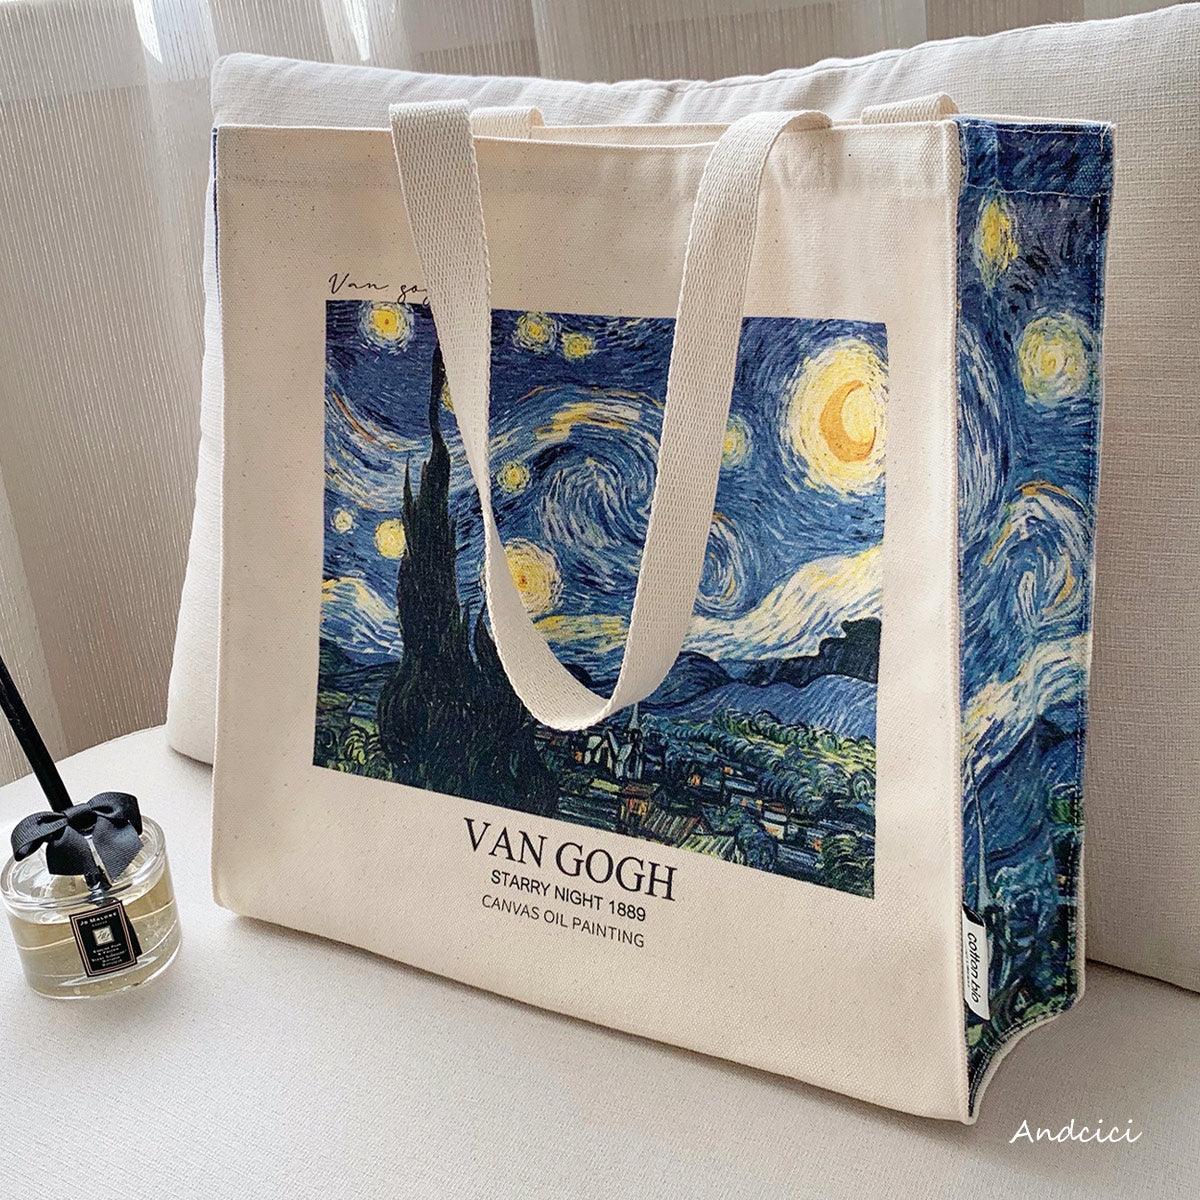 Vincent Van Gogh The Starry Night, 1889 Canvas Tote Bag with Zip - Andcici